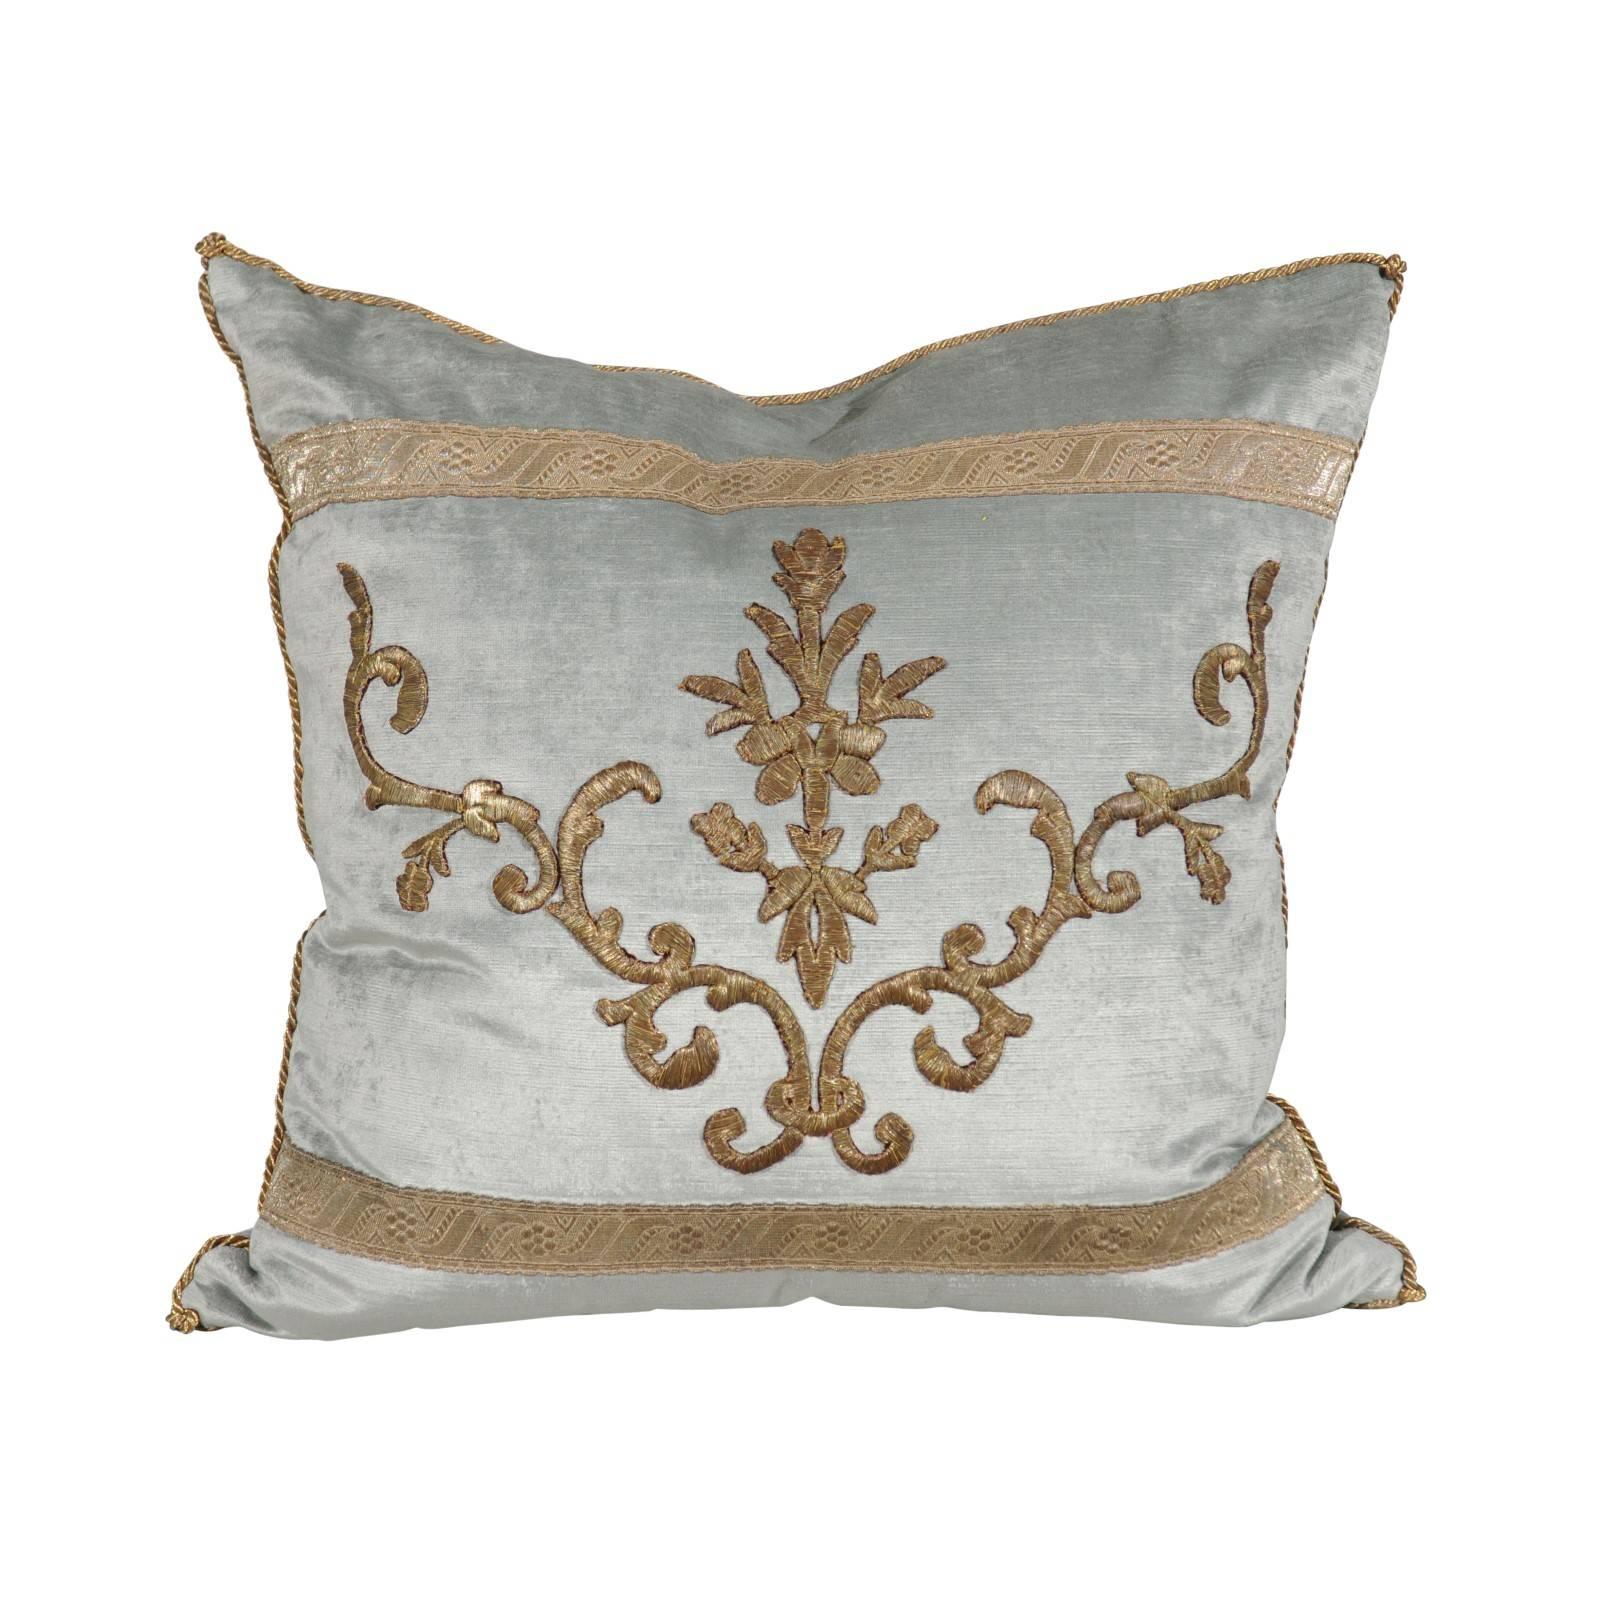 Pale French Blue Velvet Pillow Made of Ottoman Empire Gold Metallic Embroidery